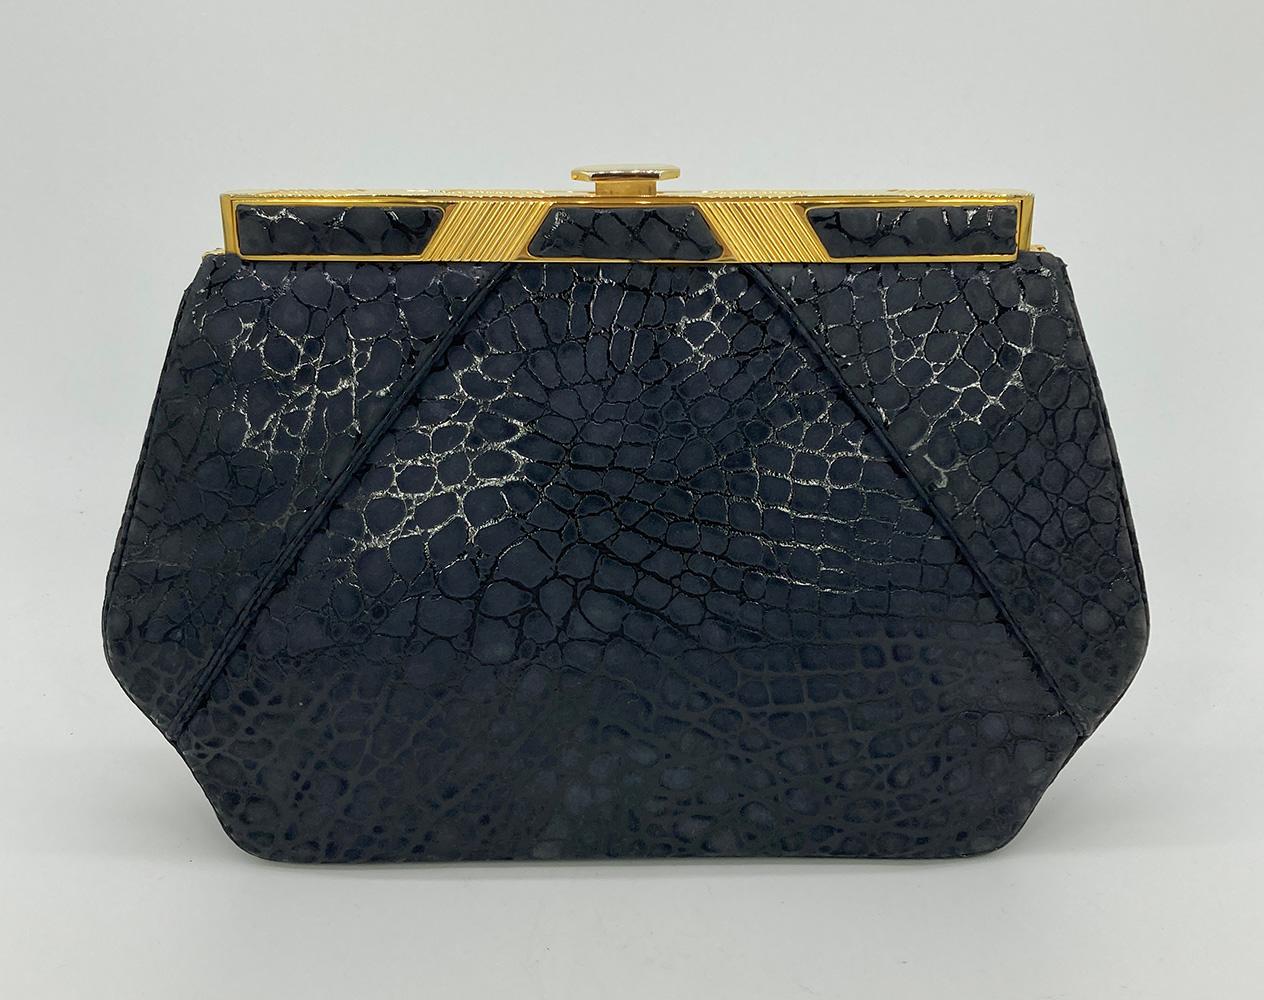 Judith Leiber Black Embossed Alligator Clutch in excellent condition. Black embossed suede exterior in an alligator print trimmed with gold hardware. Top button closure opens to a black nylon interior with one slit and one zipped side pockets.